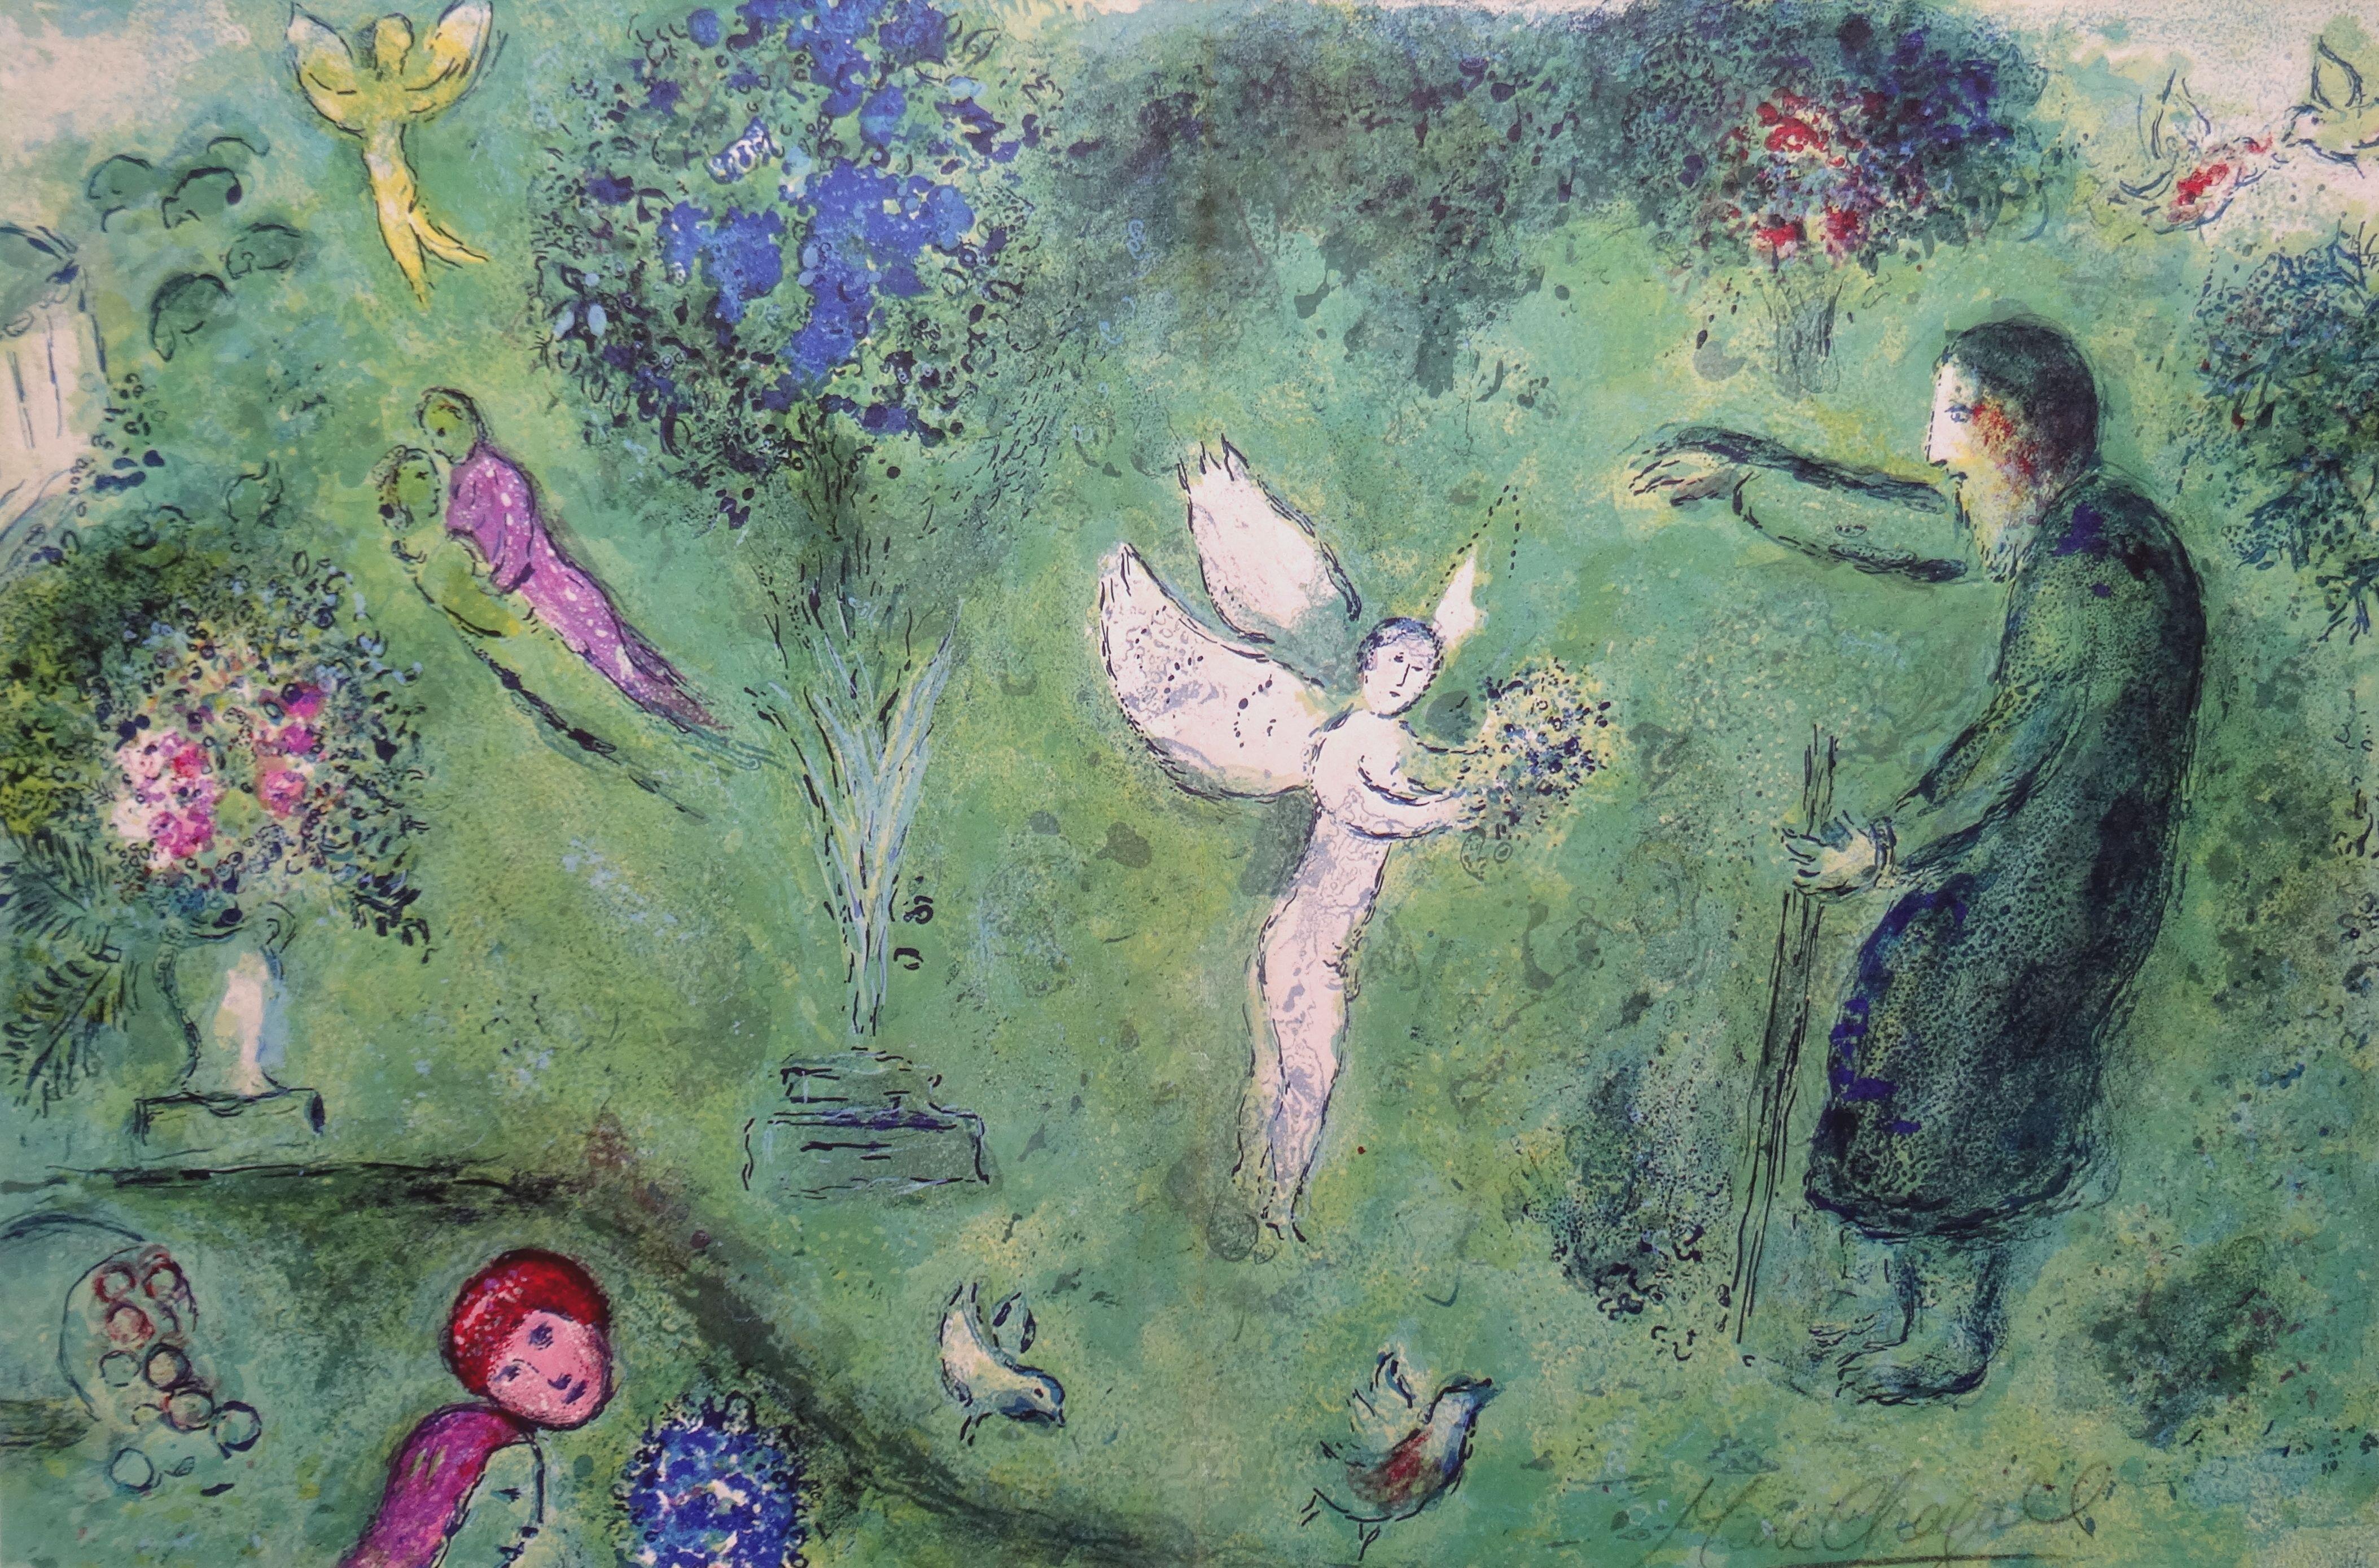 Marc Chagall Figurative Print - Daphnis and Chloe Suite. Paper, lithography, 31x47 cm